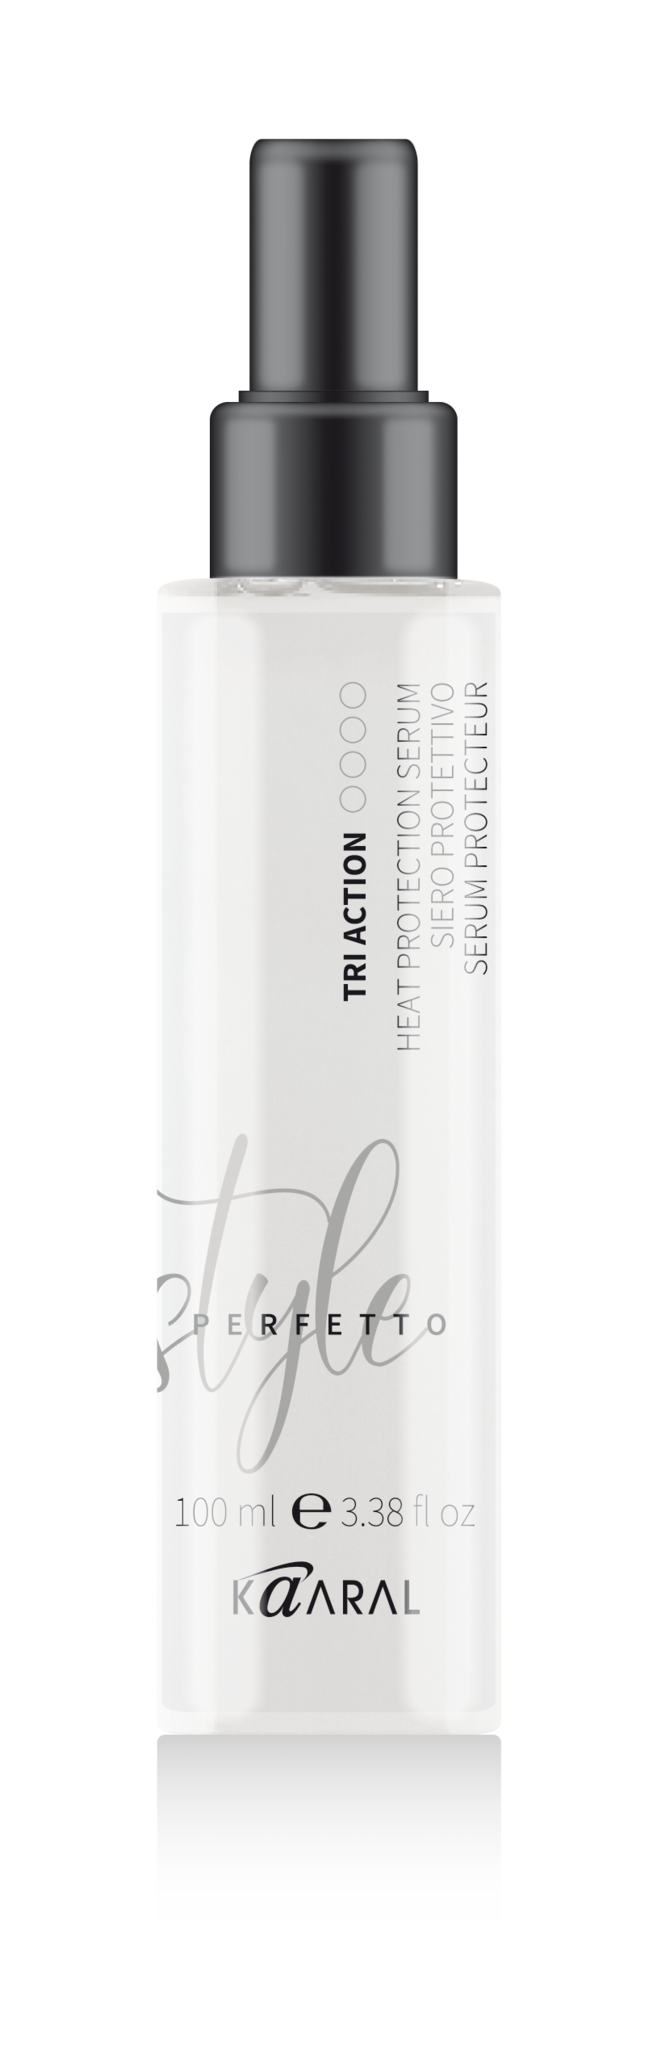 Kaaral Perfetto Tri Action Heat Protection Serum 100ml